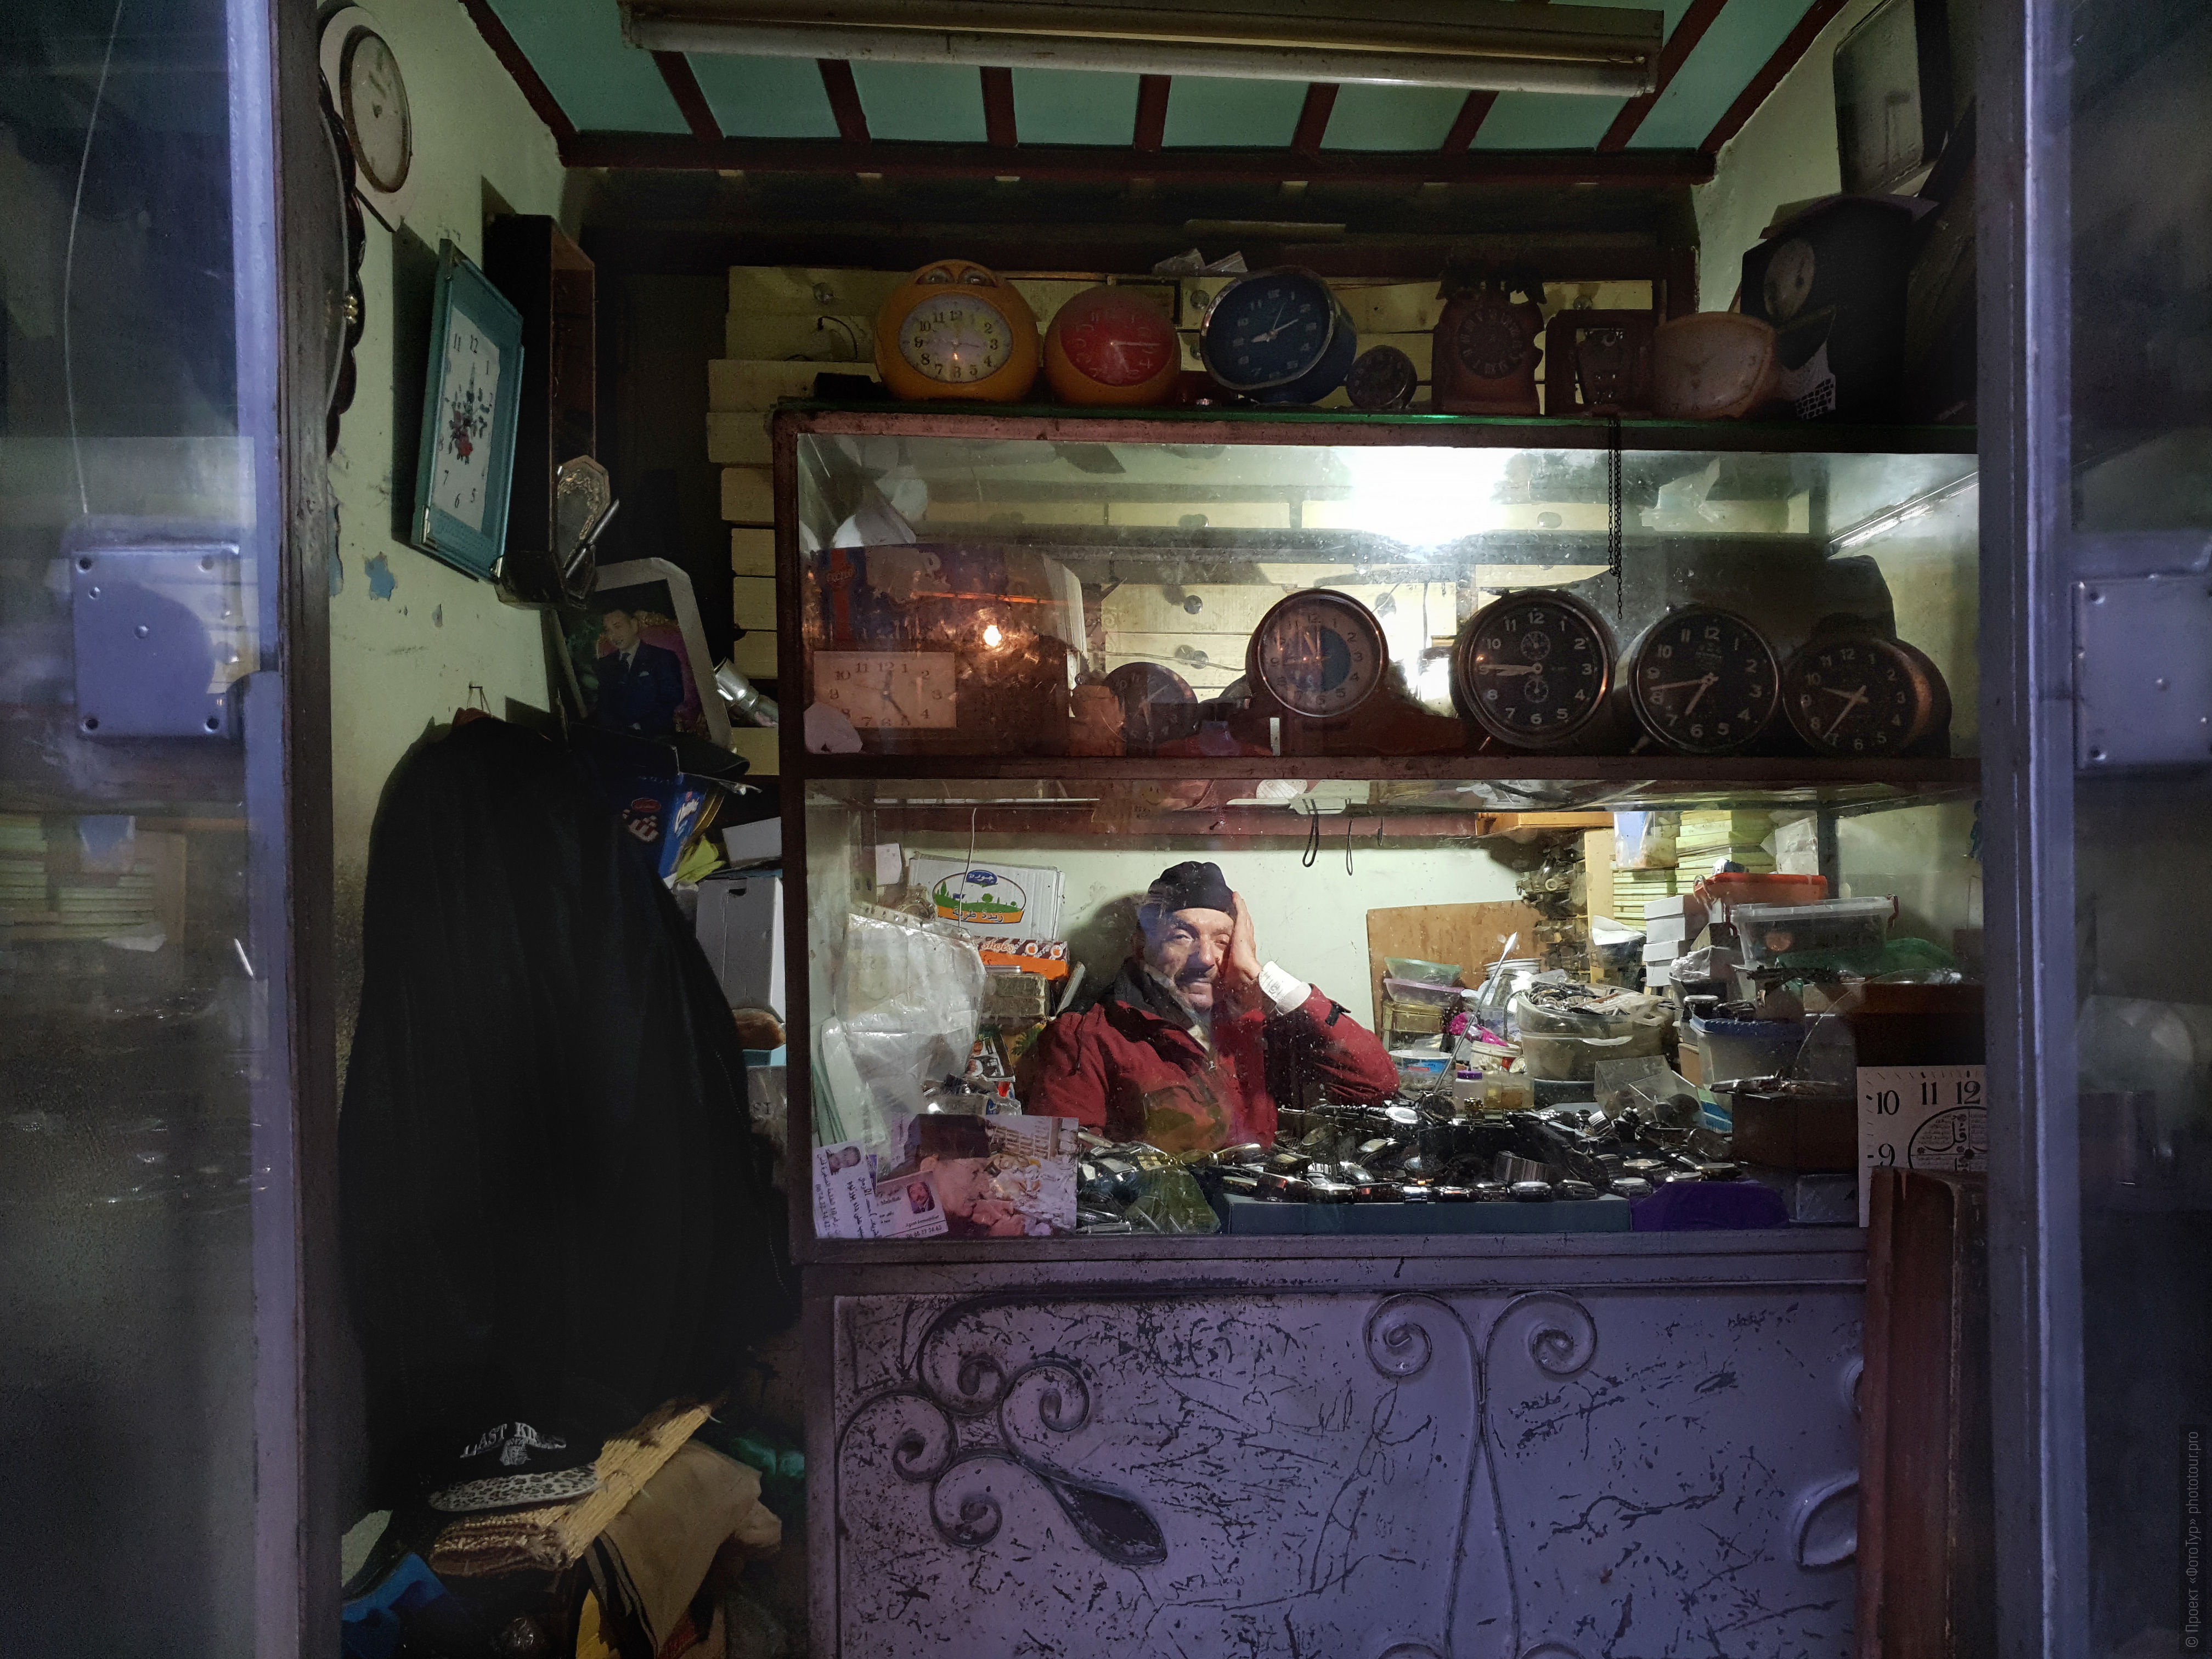 Ancient watch shop in the medina of Fes. Adventure photo tour: medina, cascades, sands and ports of Morocco, April 4 - 17, 2020.